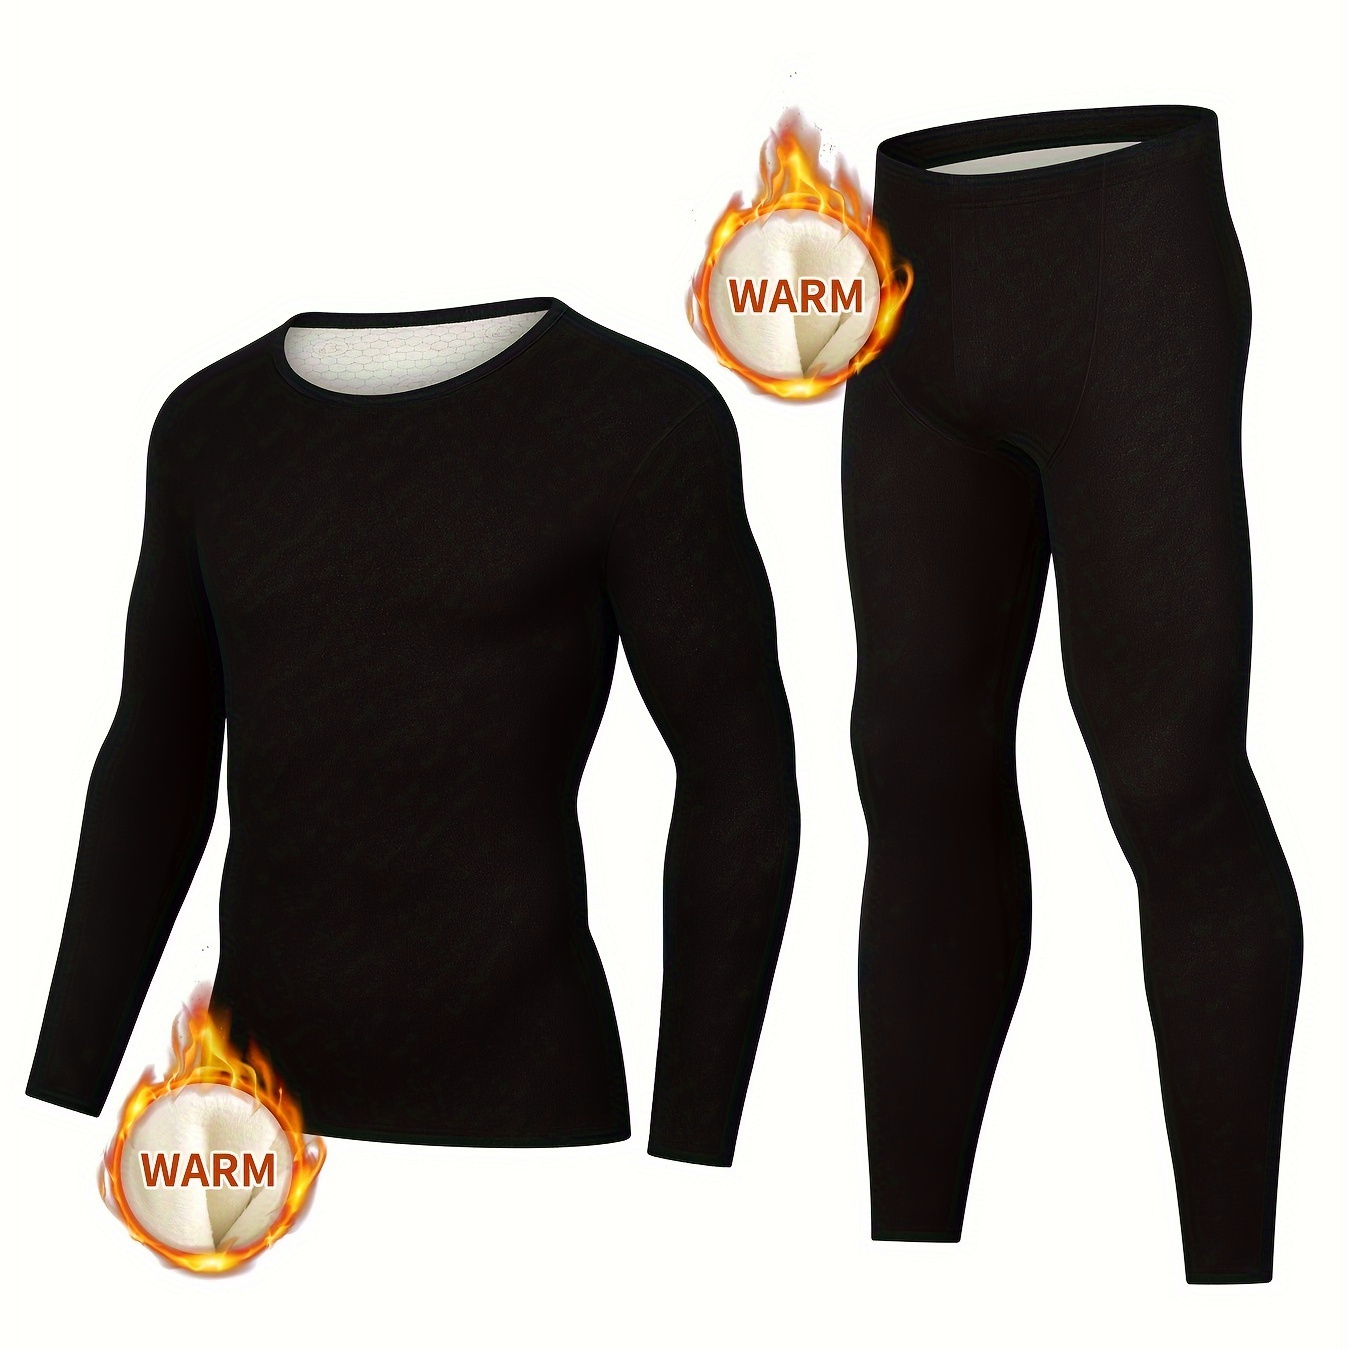 Thermal Underwear Set For Men, Long Johns Set Ultra Soft Lined Warm Base Layer Top And Bottom For Autumn Winter